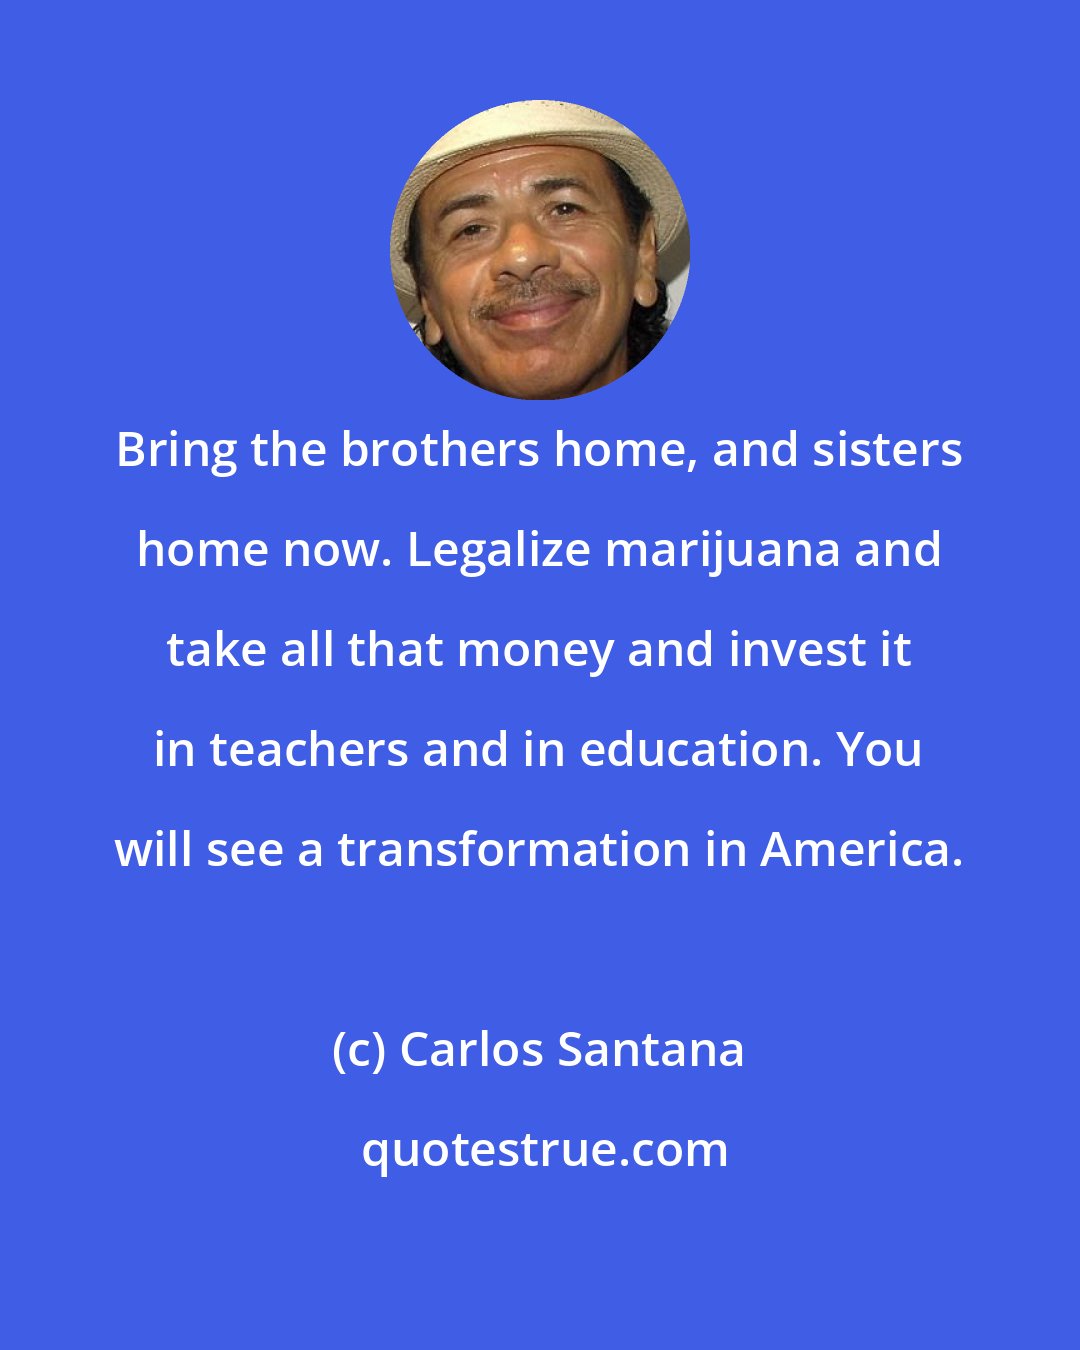 Carlos Santana: Bring the brothers home, and sisters home now. Legalize marijuana and take all that money and invest it in teachers and in education. You will see a transformation in America.